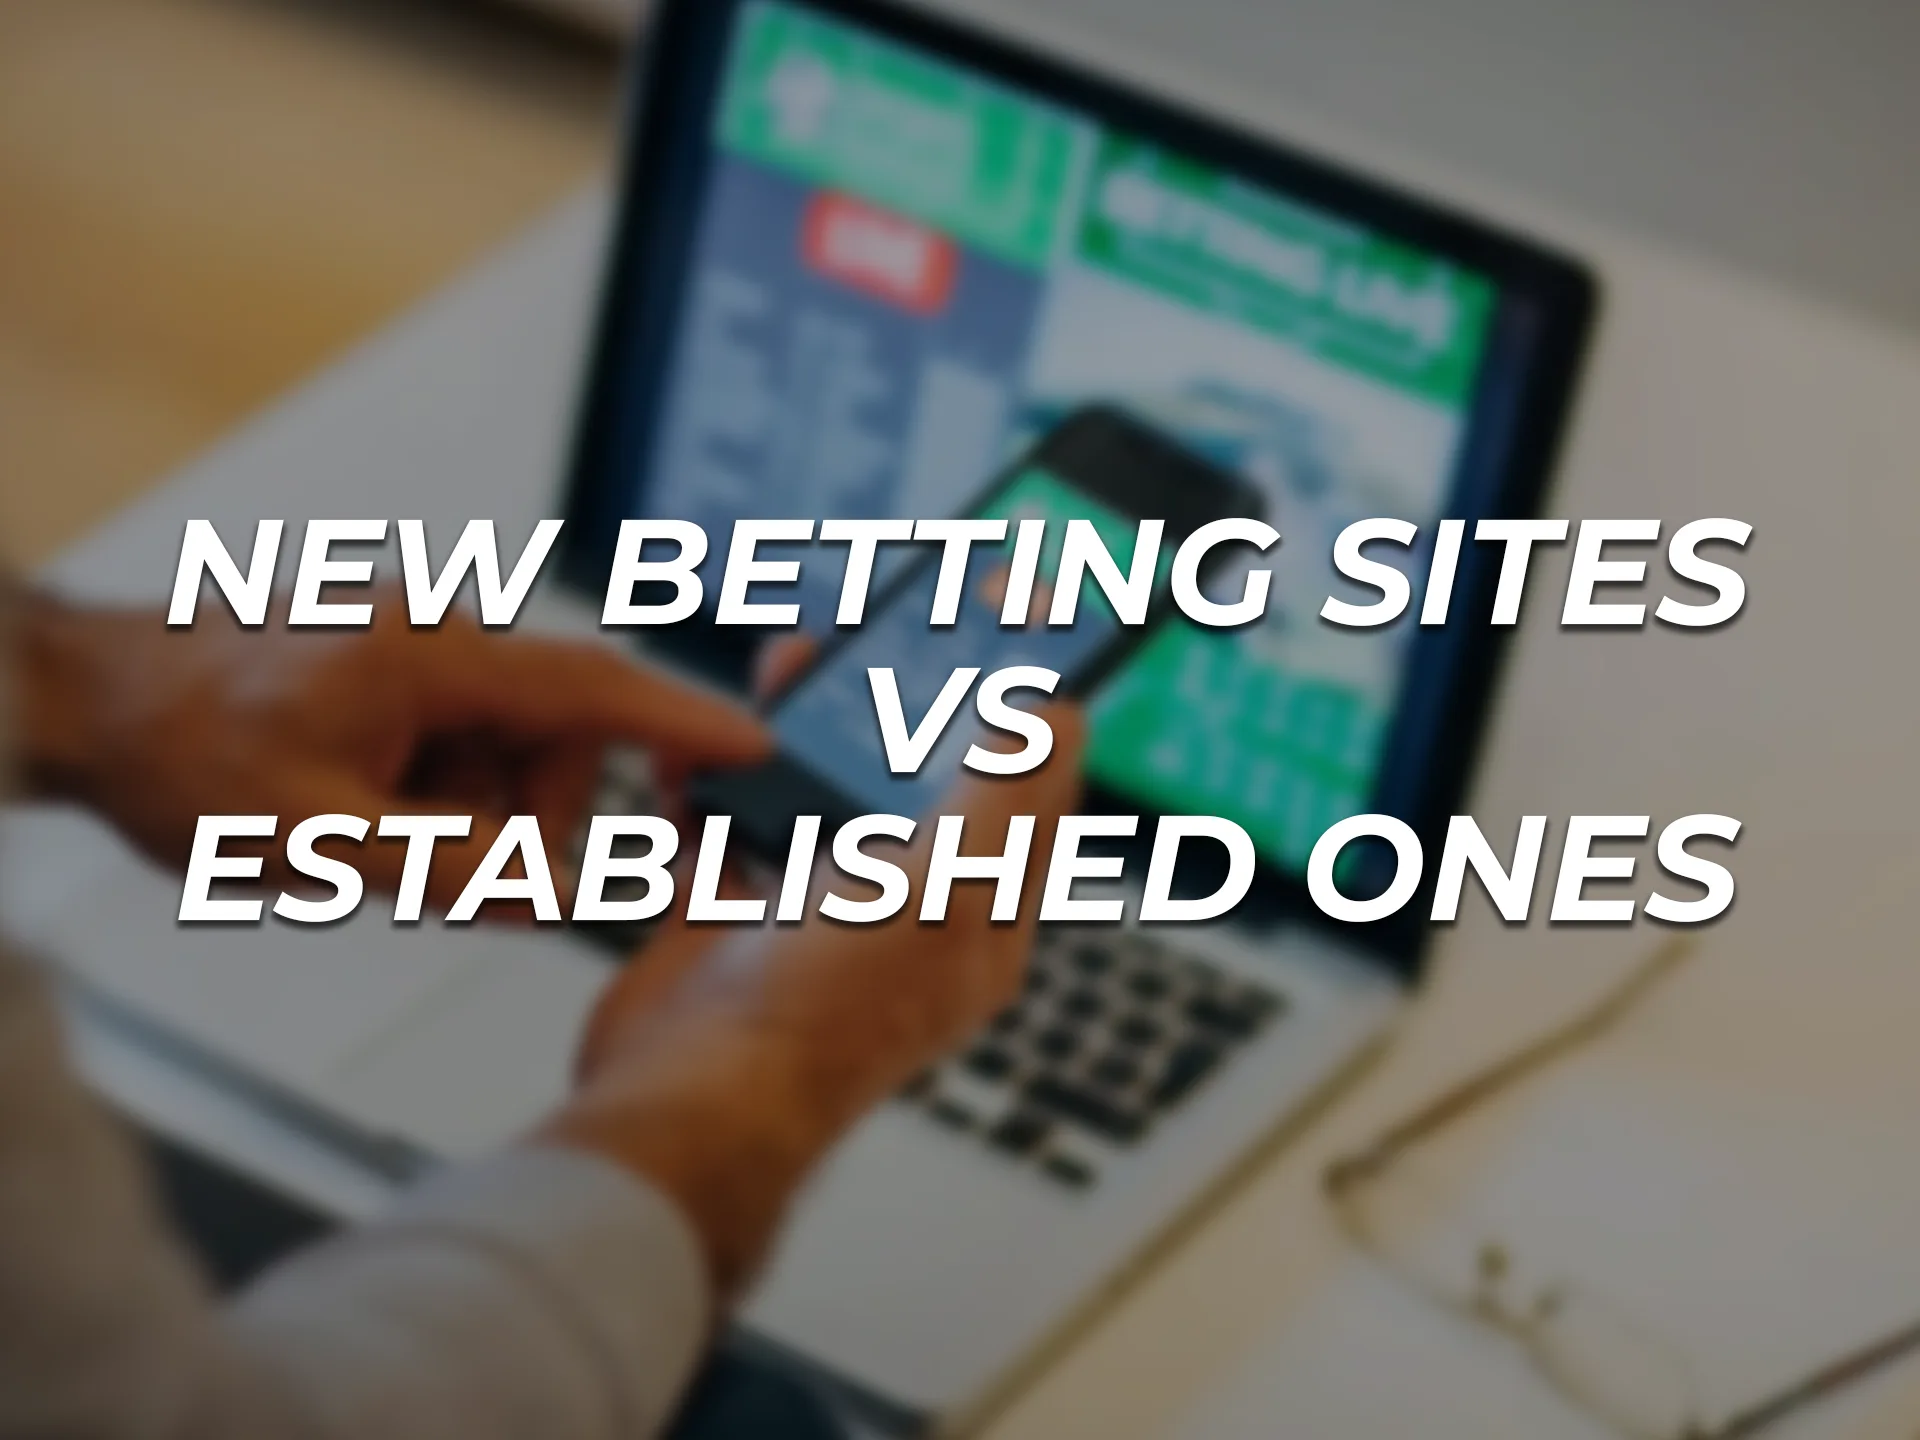 New and existing betting sites have their pros and cons.